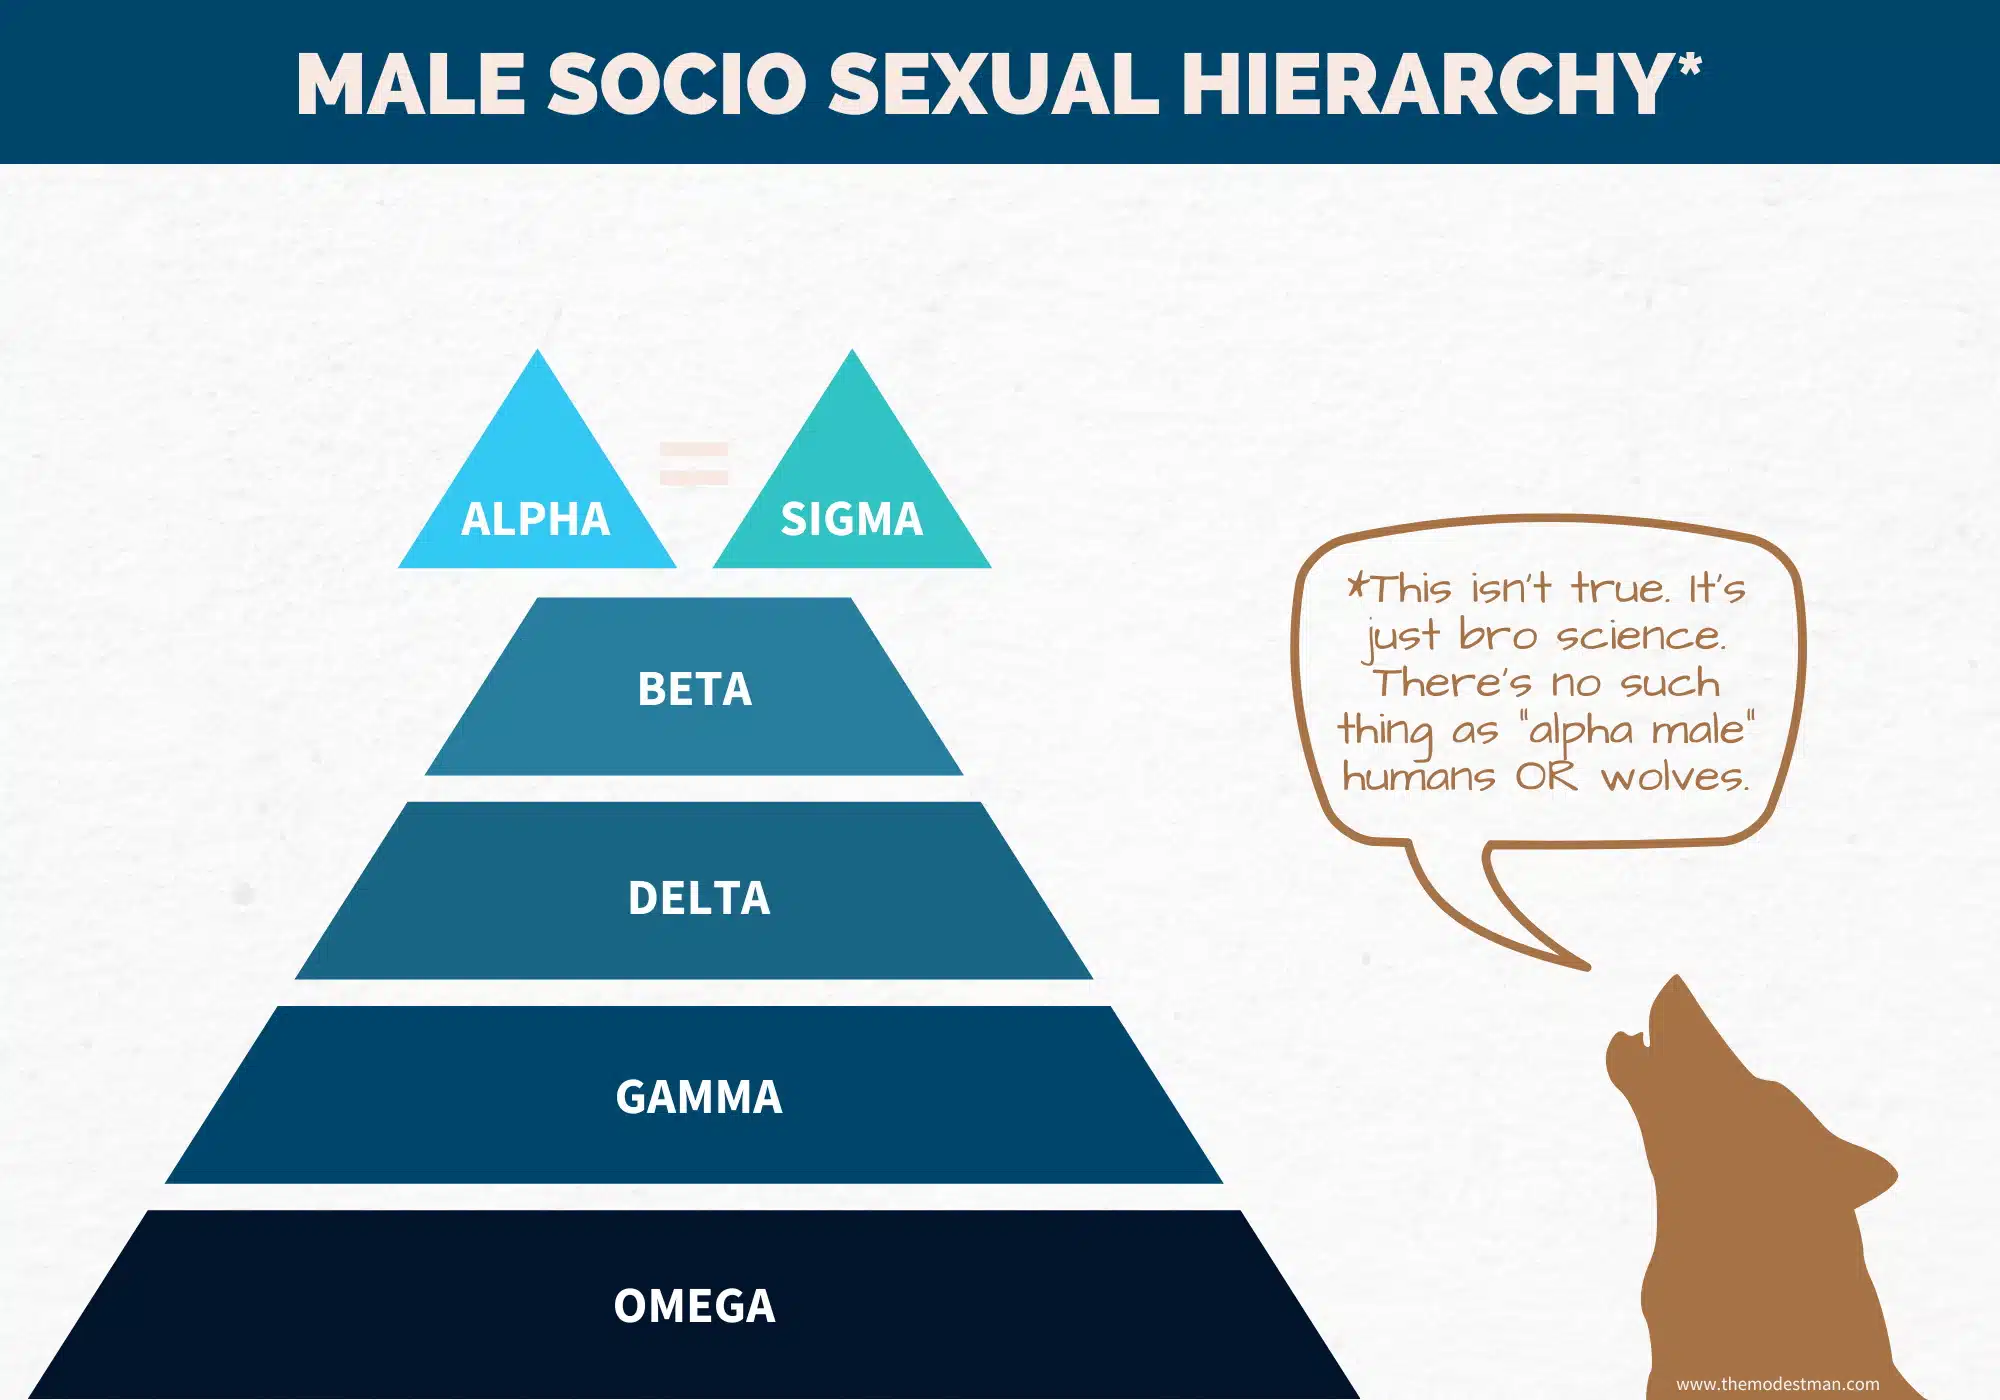 Male Hierarchy Explained Is This Just Bro Science